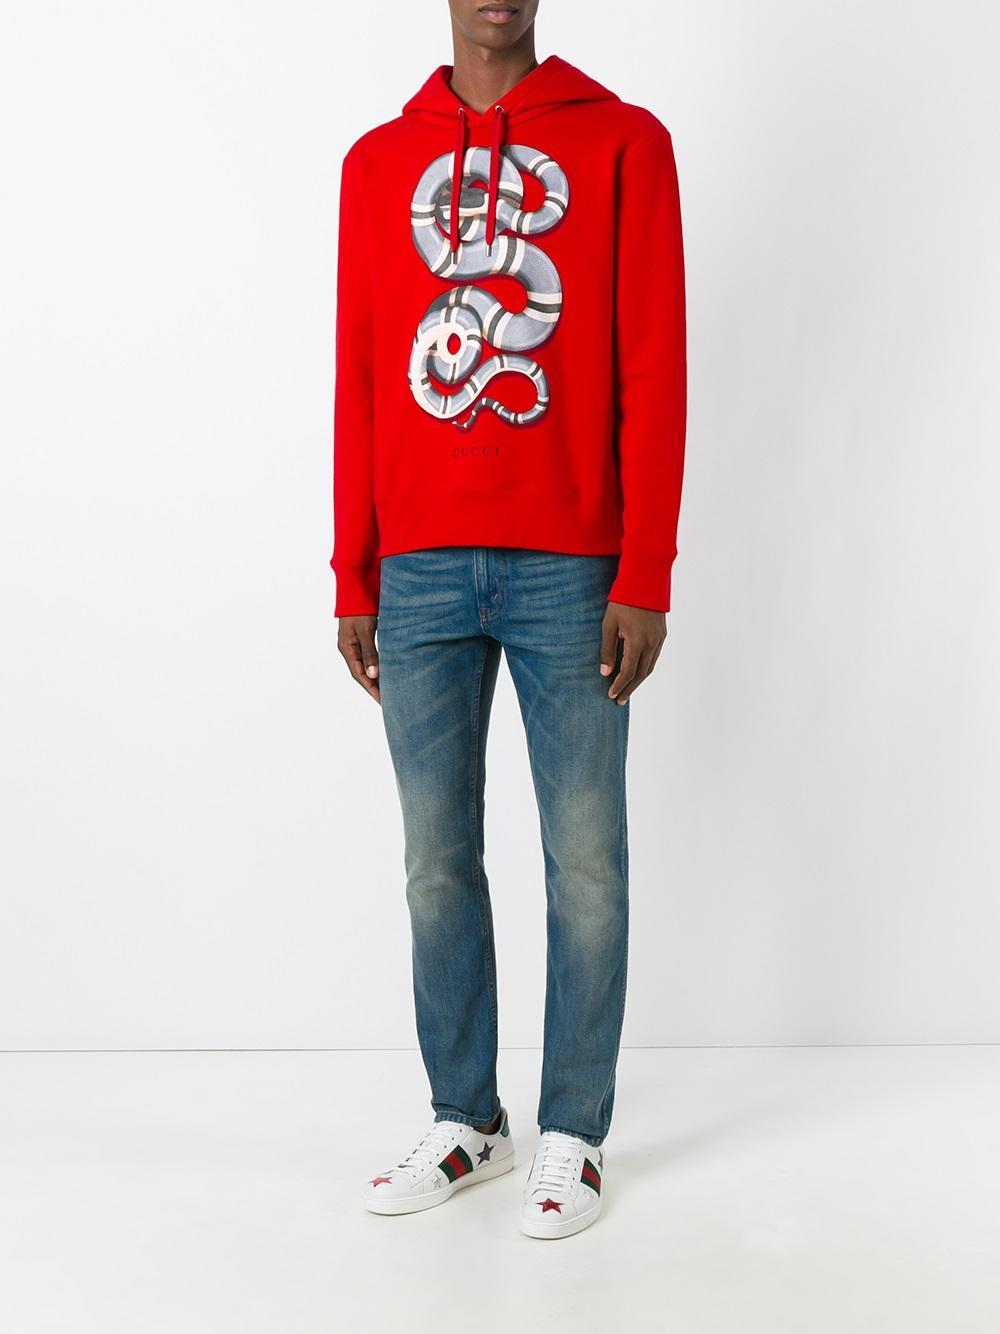 Gucci Cotton Snake Print Hoodie in Red for Men - Lyst